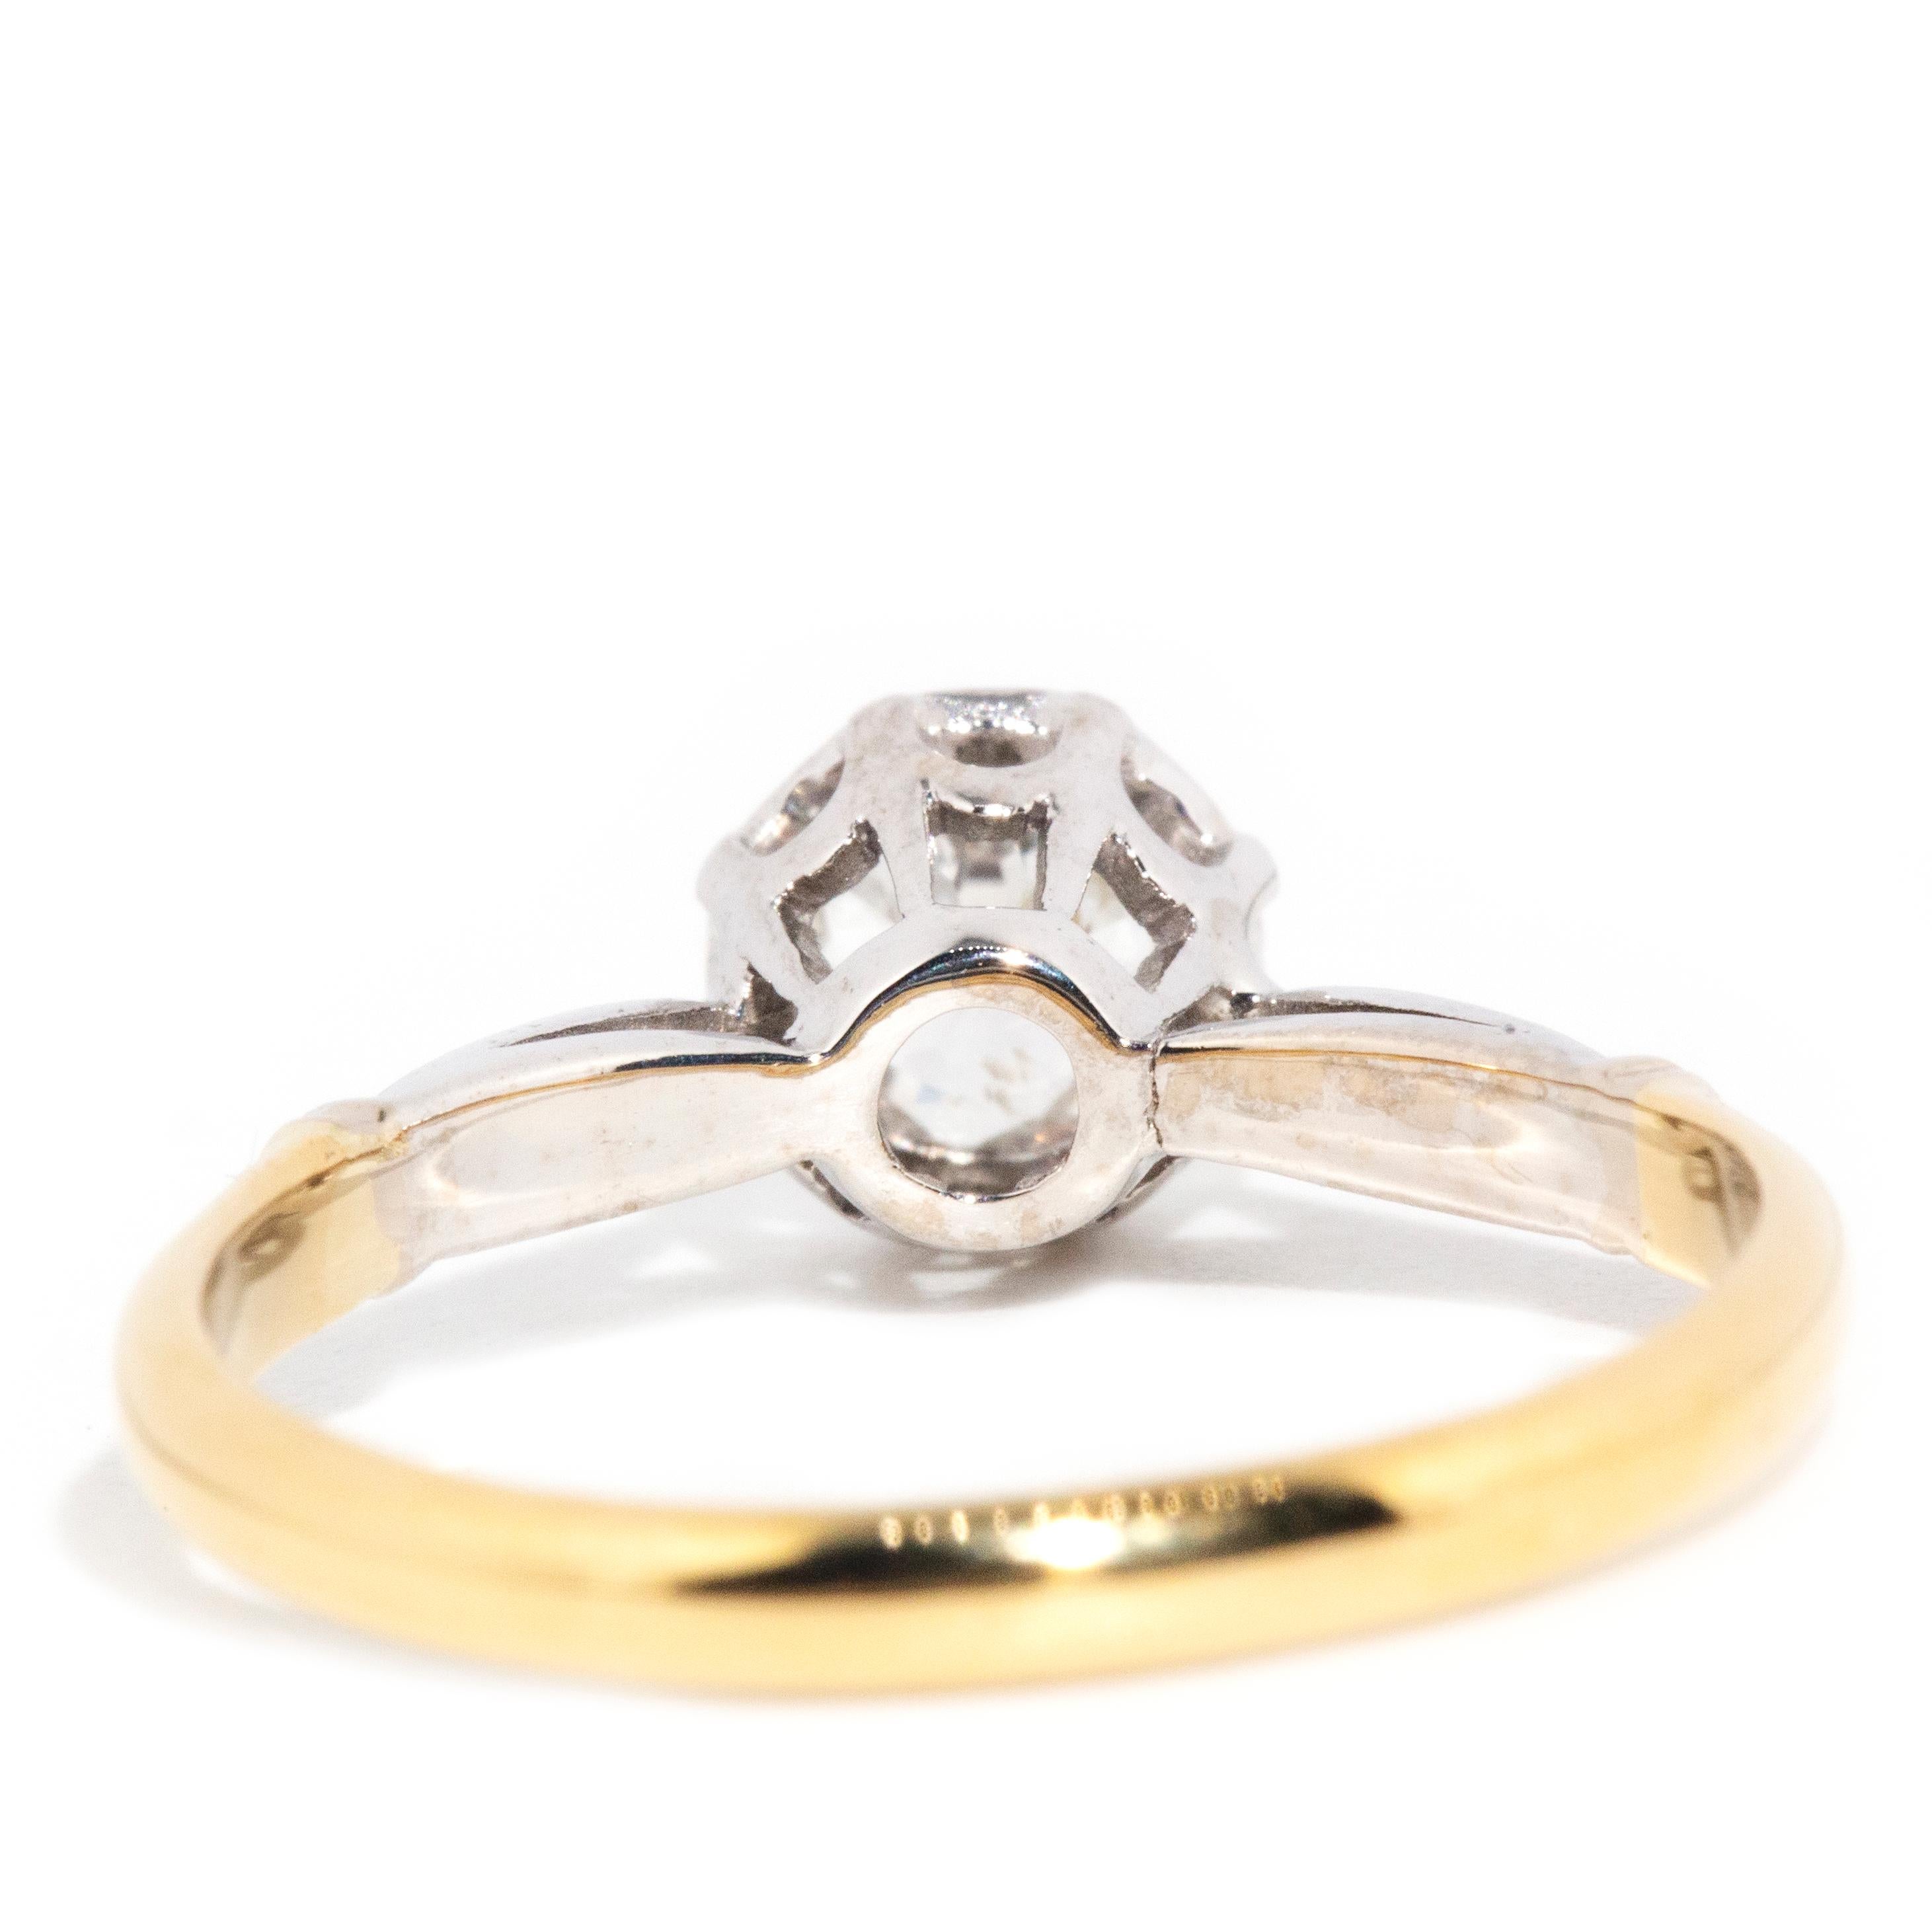 Vintage Circa 1940s 18 Carat Yellow & White Gold Old Cut Solitaire Diamond Ring For Sale 2